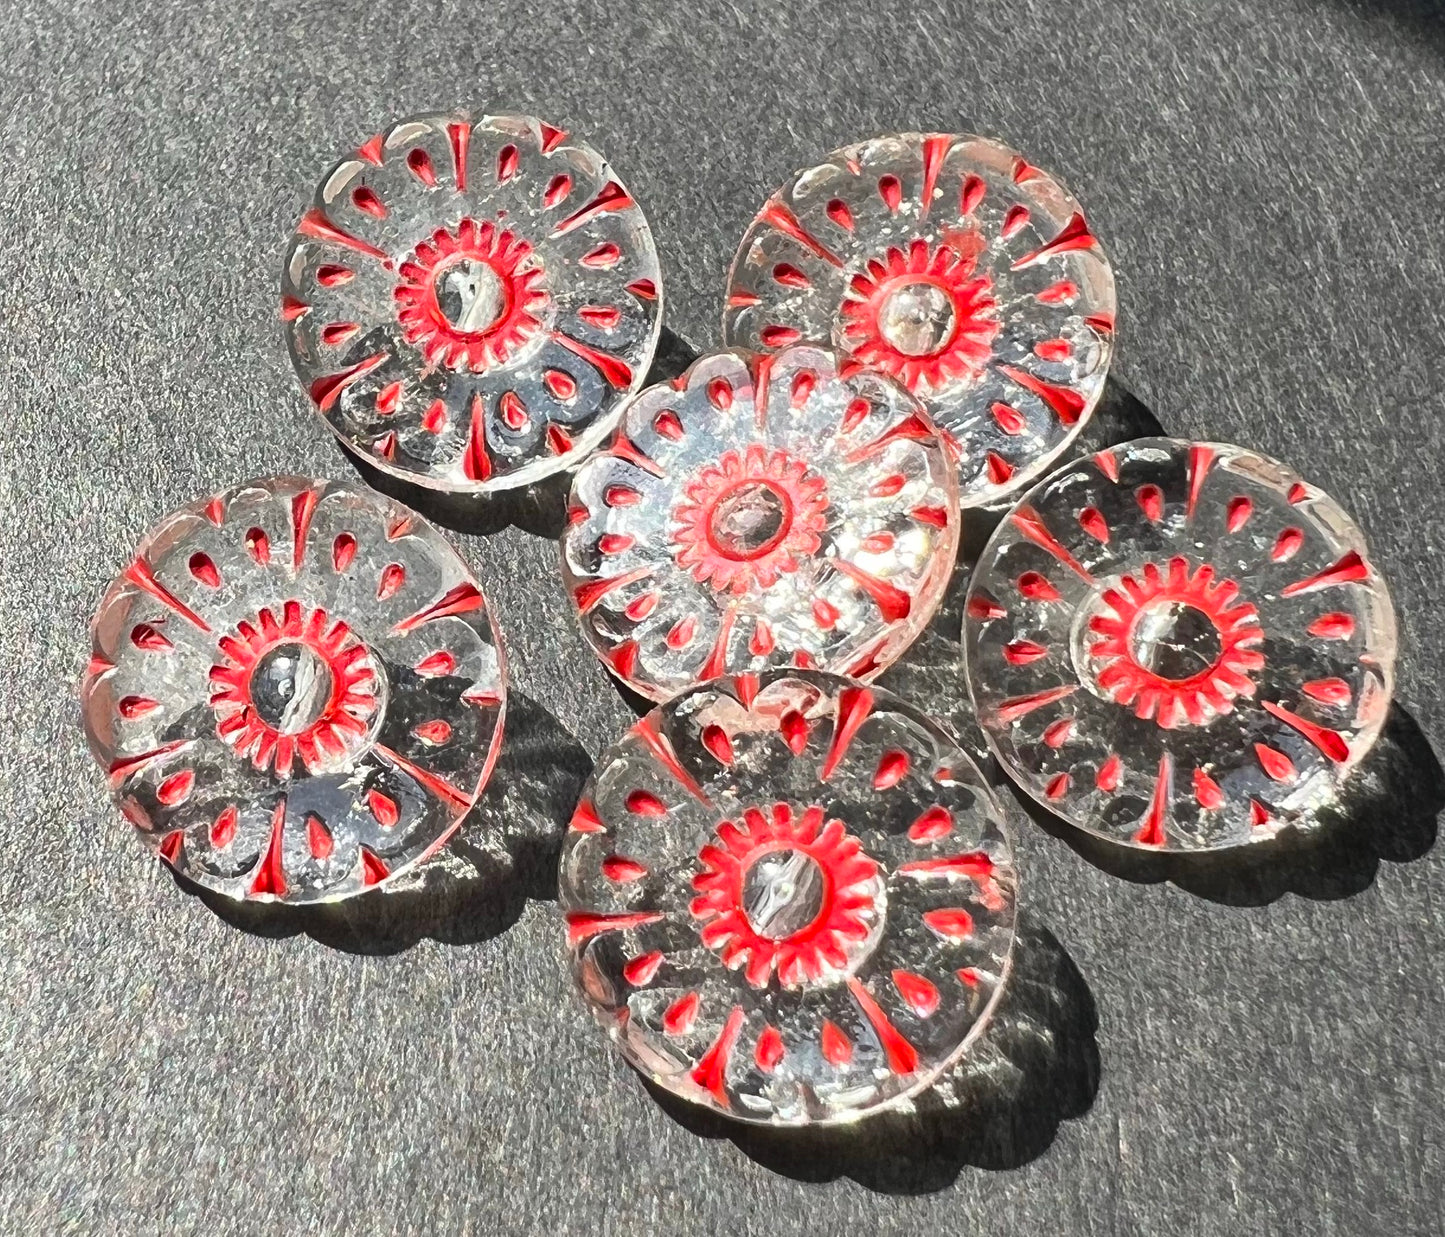 6 Striking Red Painted 1920s Glass Buttons - 15mm wide